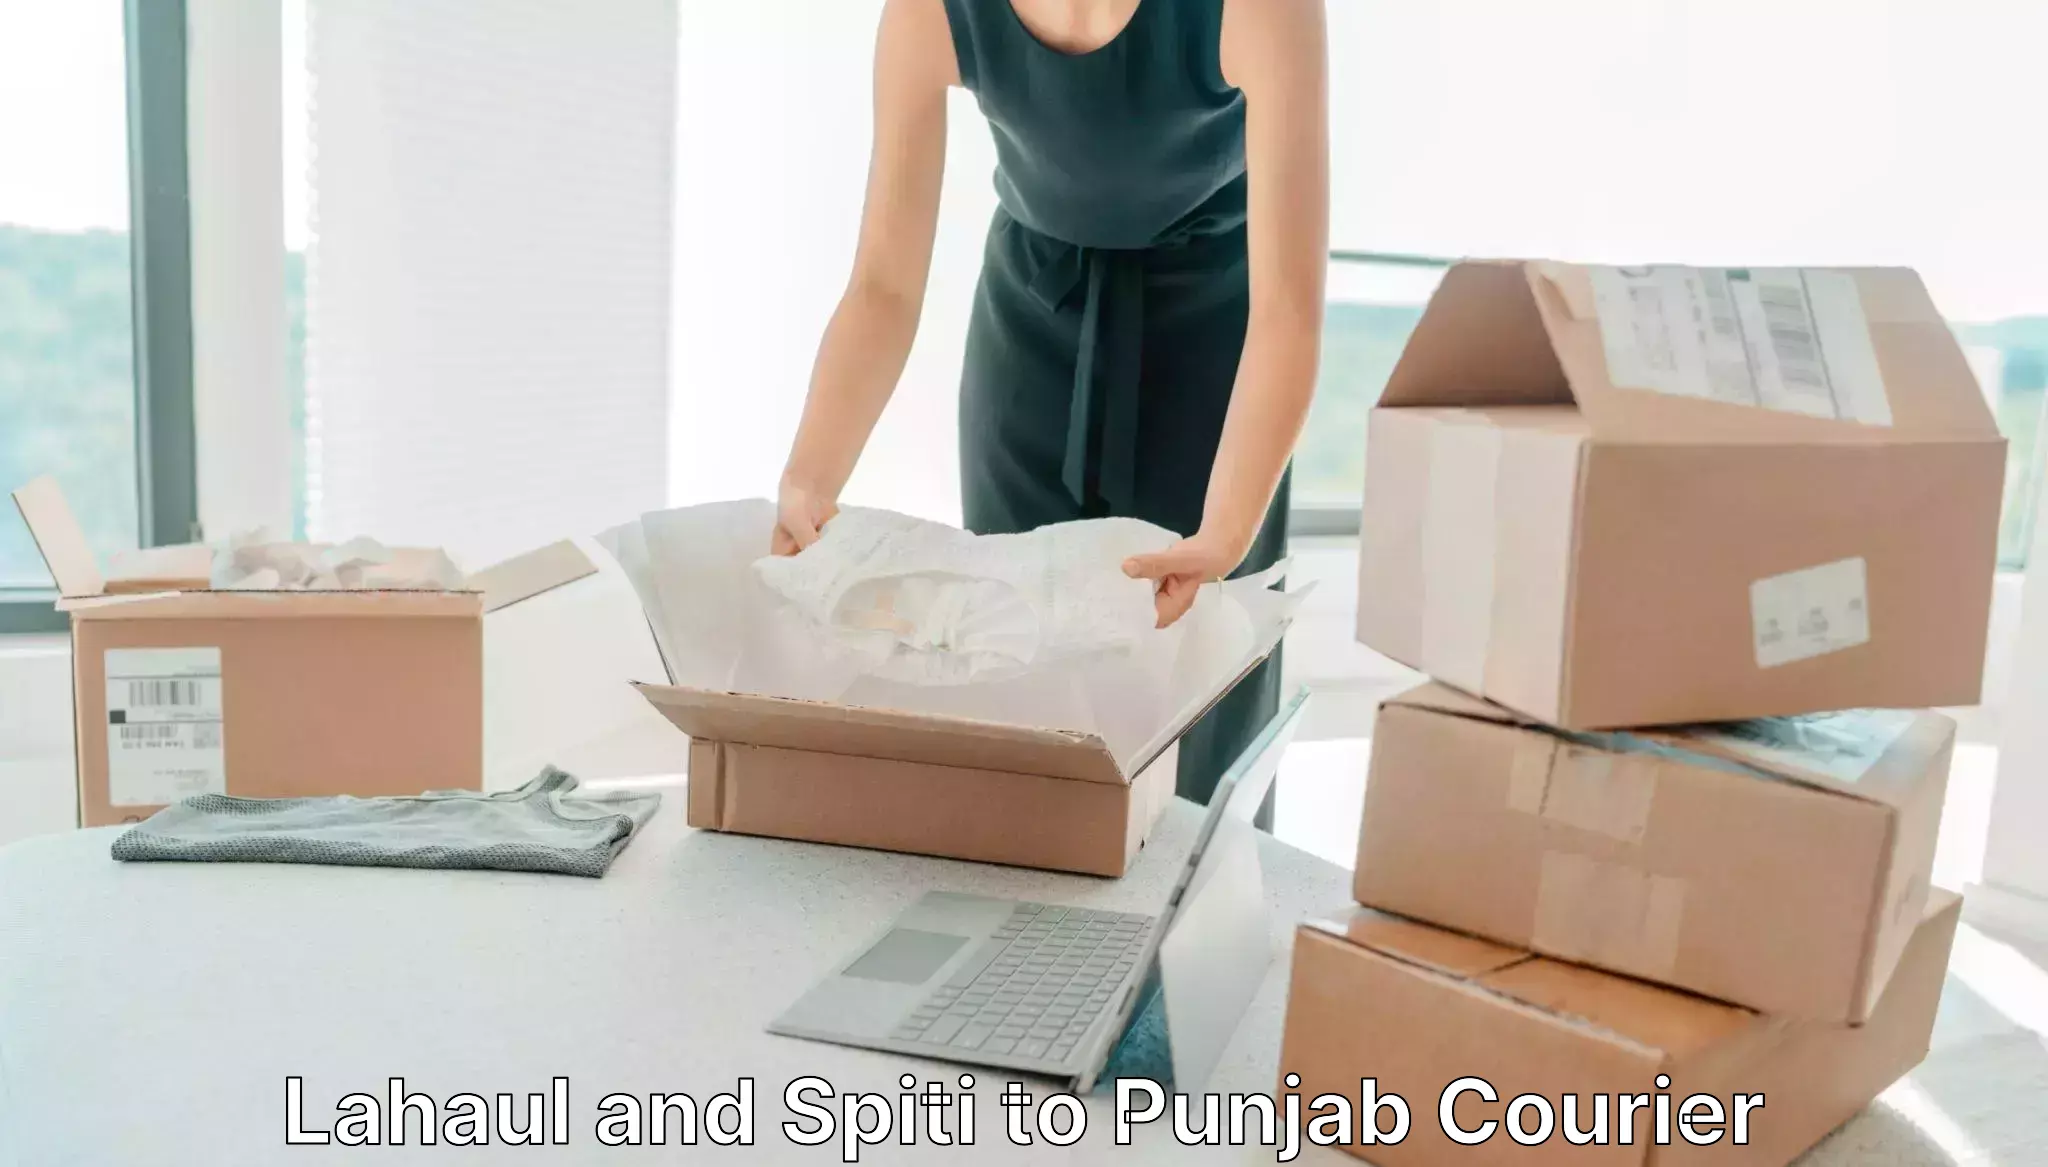 Business delivery service Lahaul and Spiti to Patiala